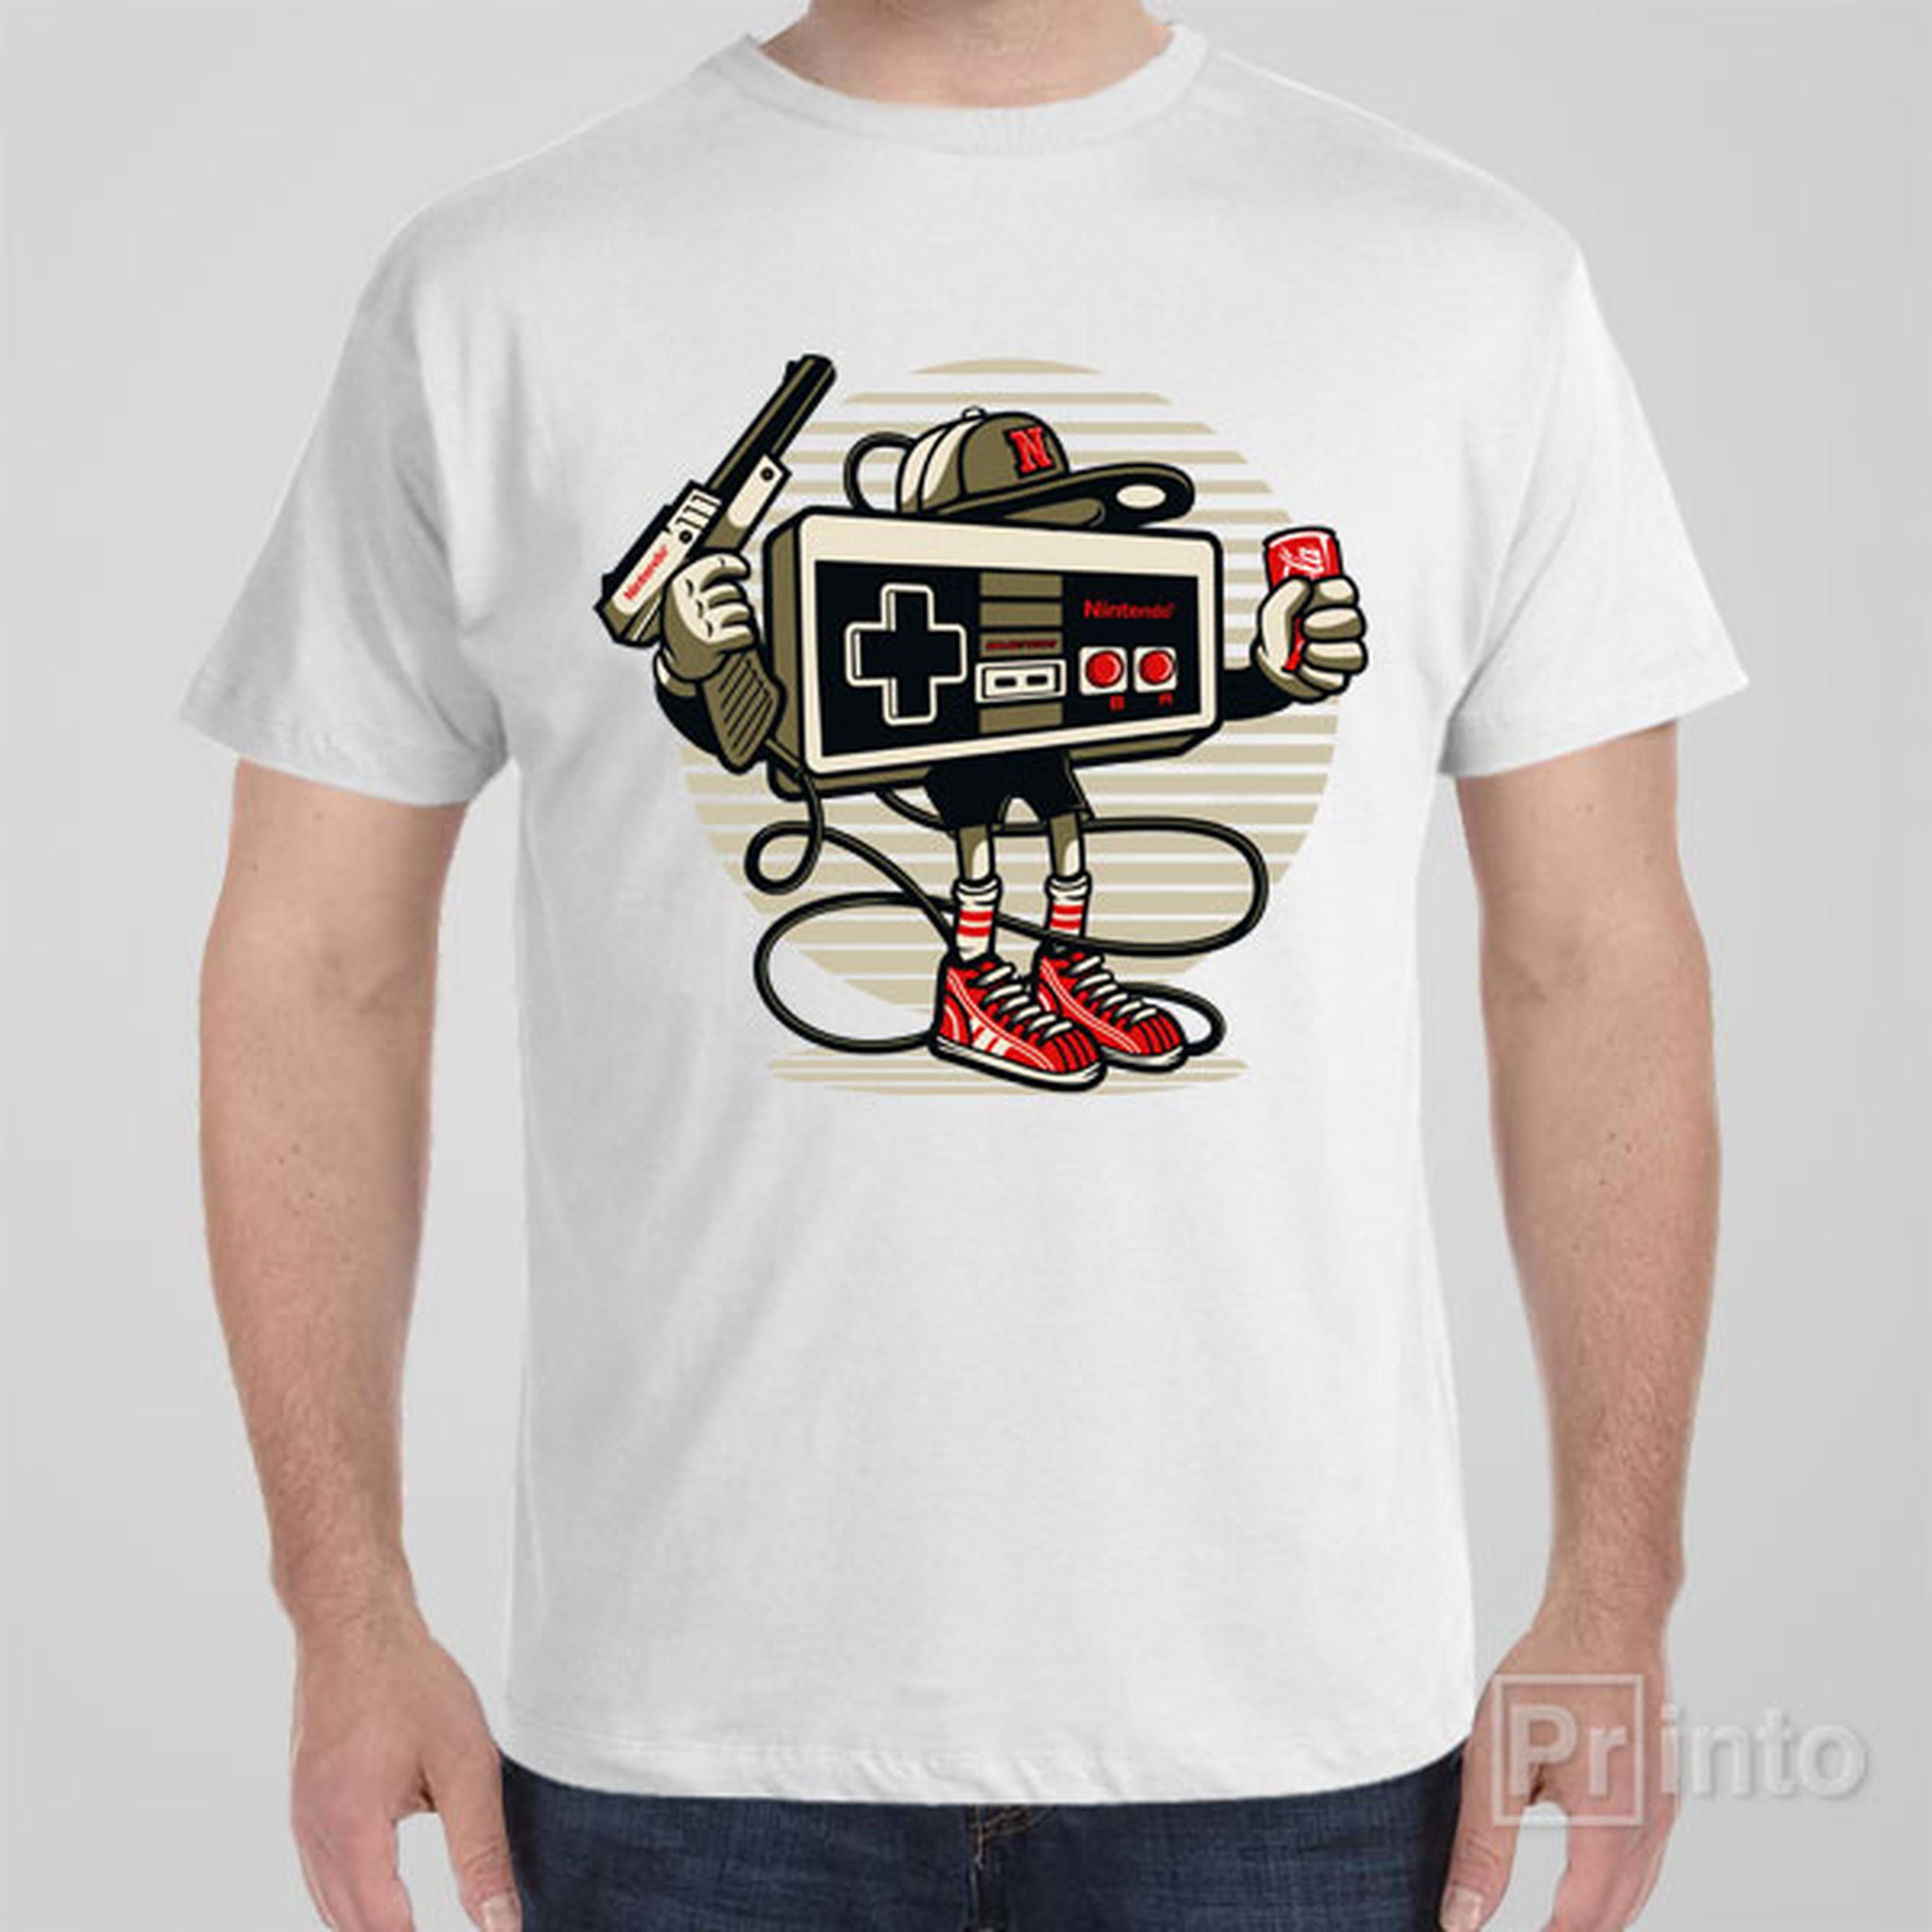 lets-play-t-shirt